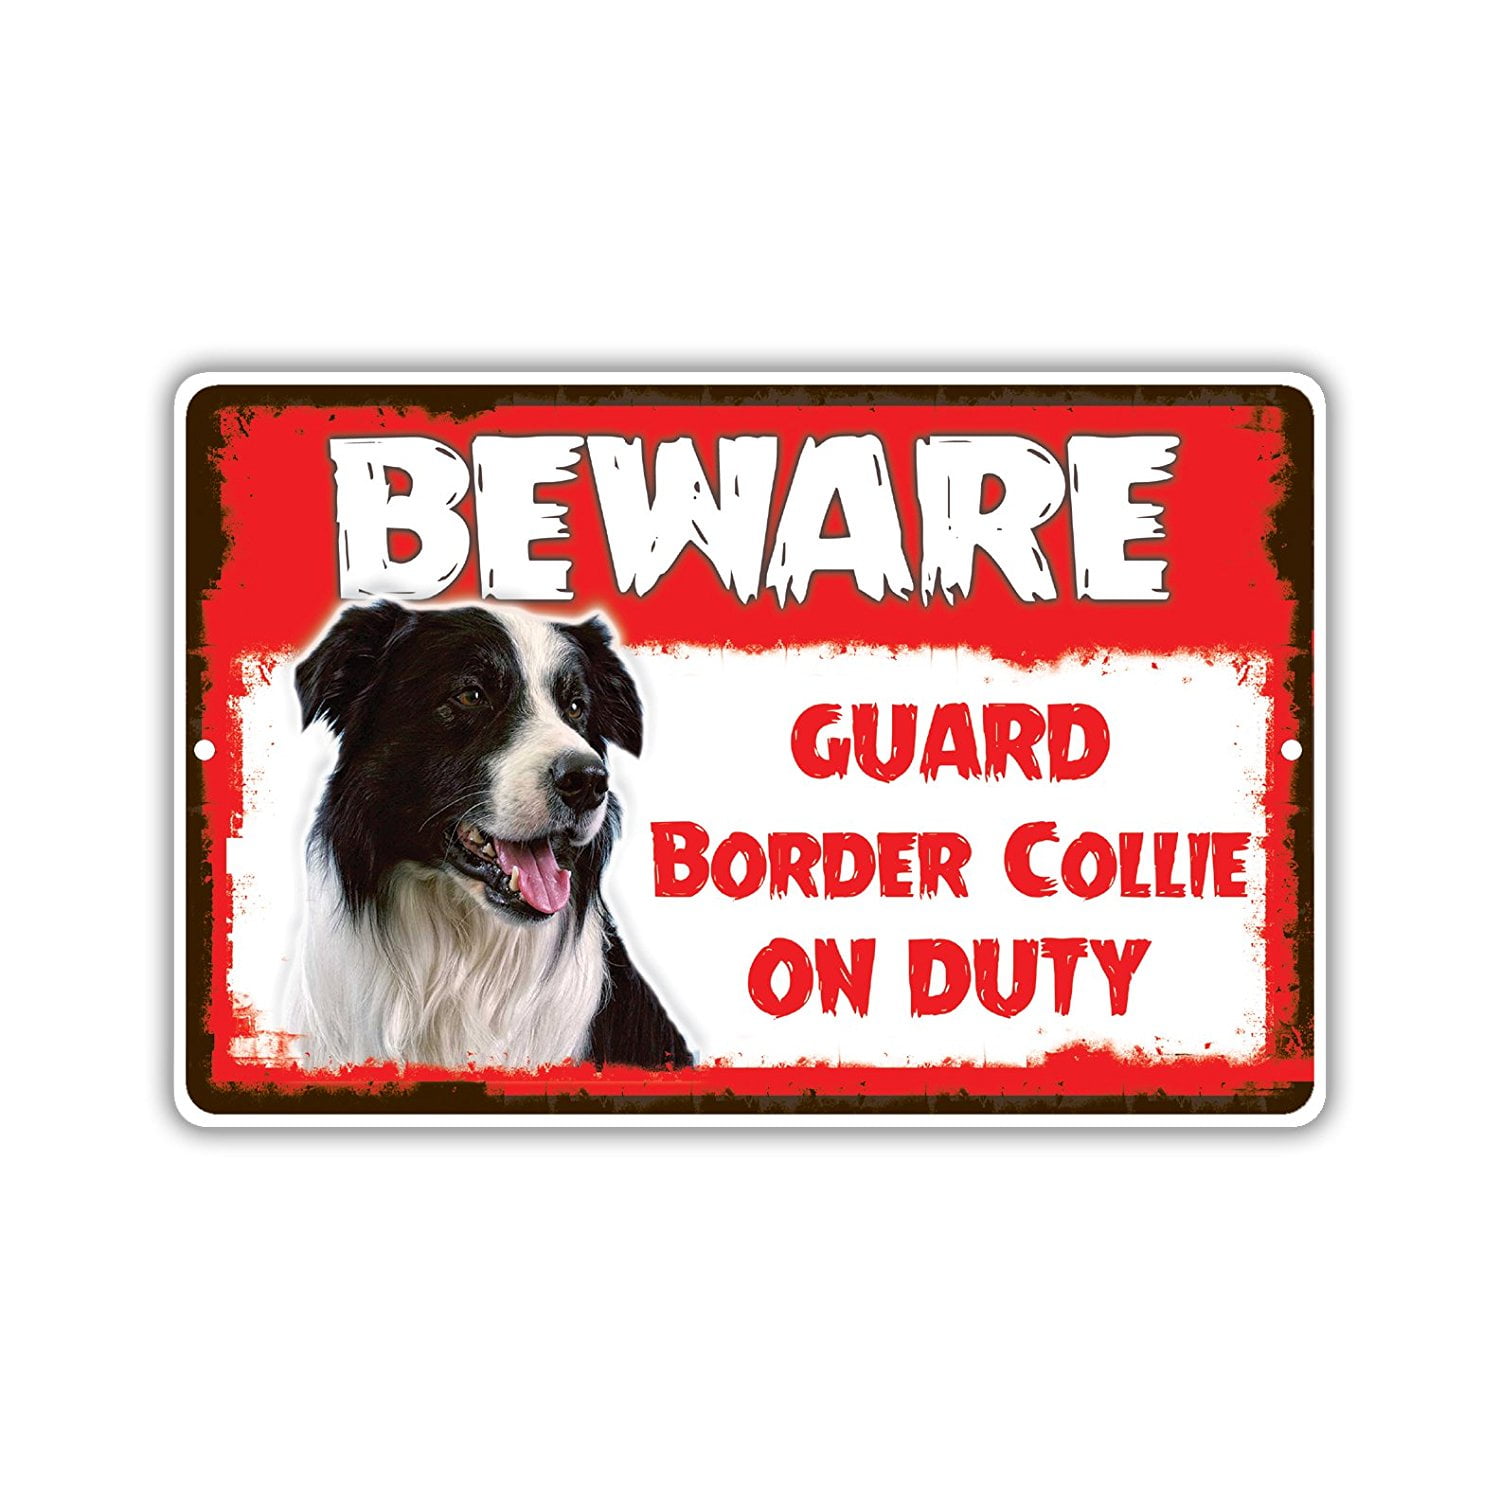 PETS 8"X12" ALUM SIGN MAN CAVE BEWARE OF DOGS SECURITY FUNNY WARNING 